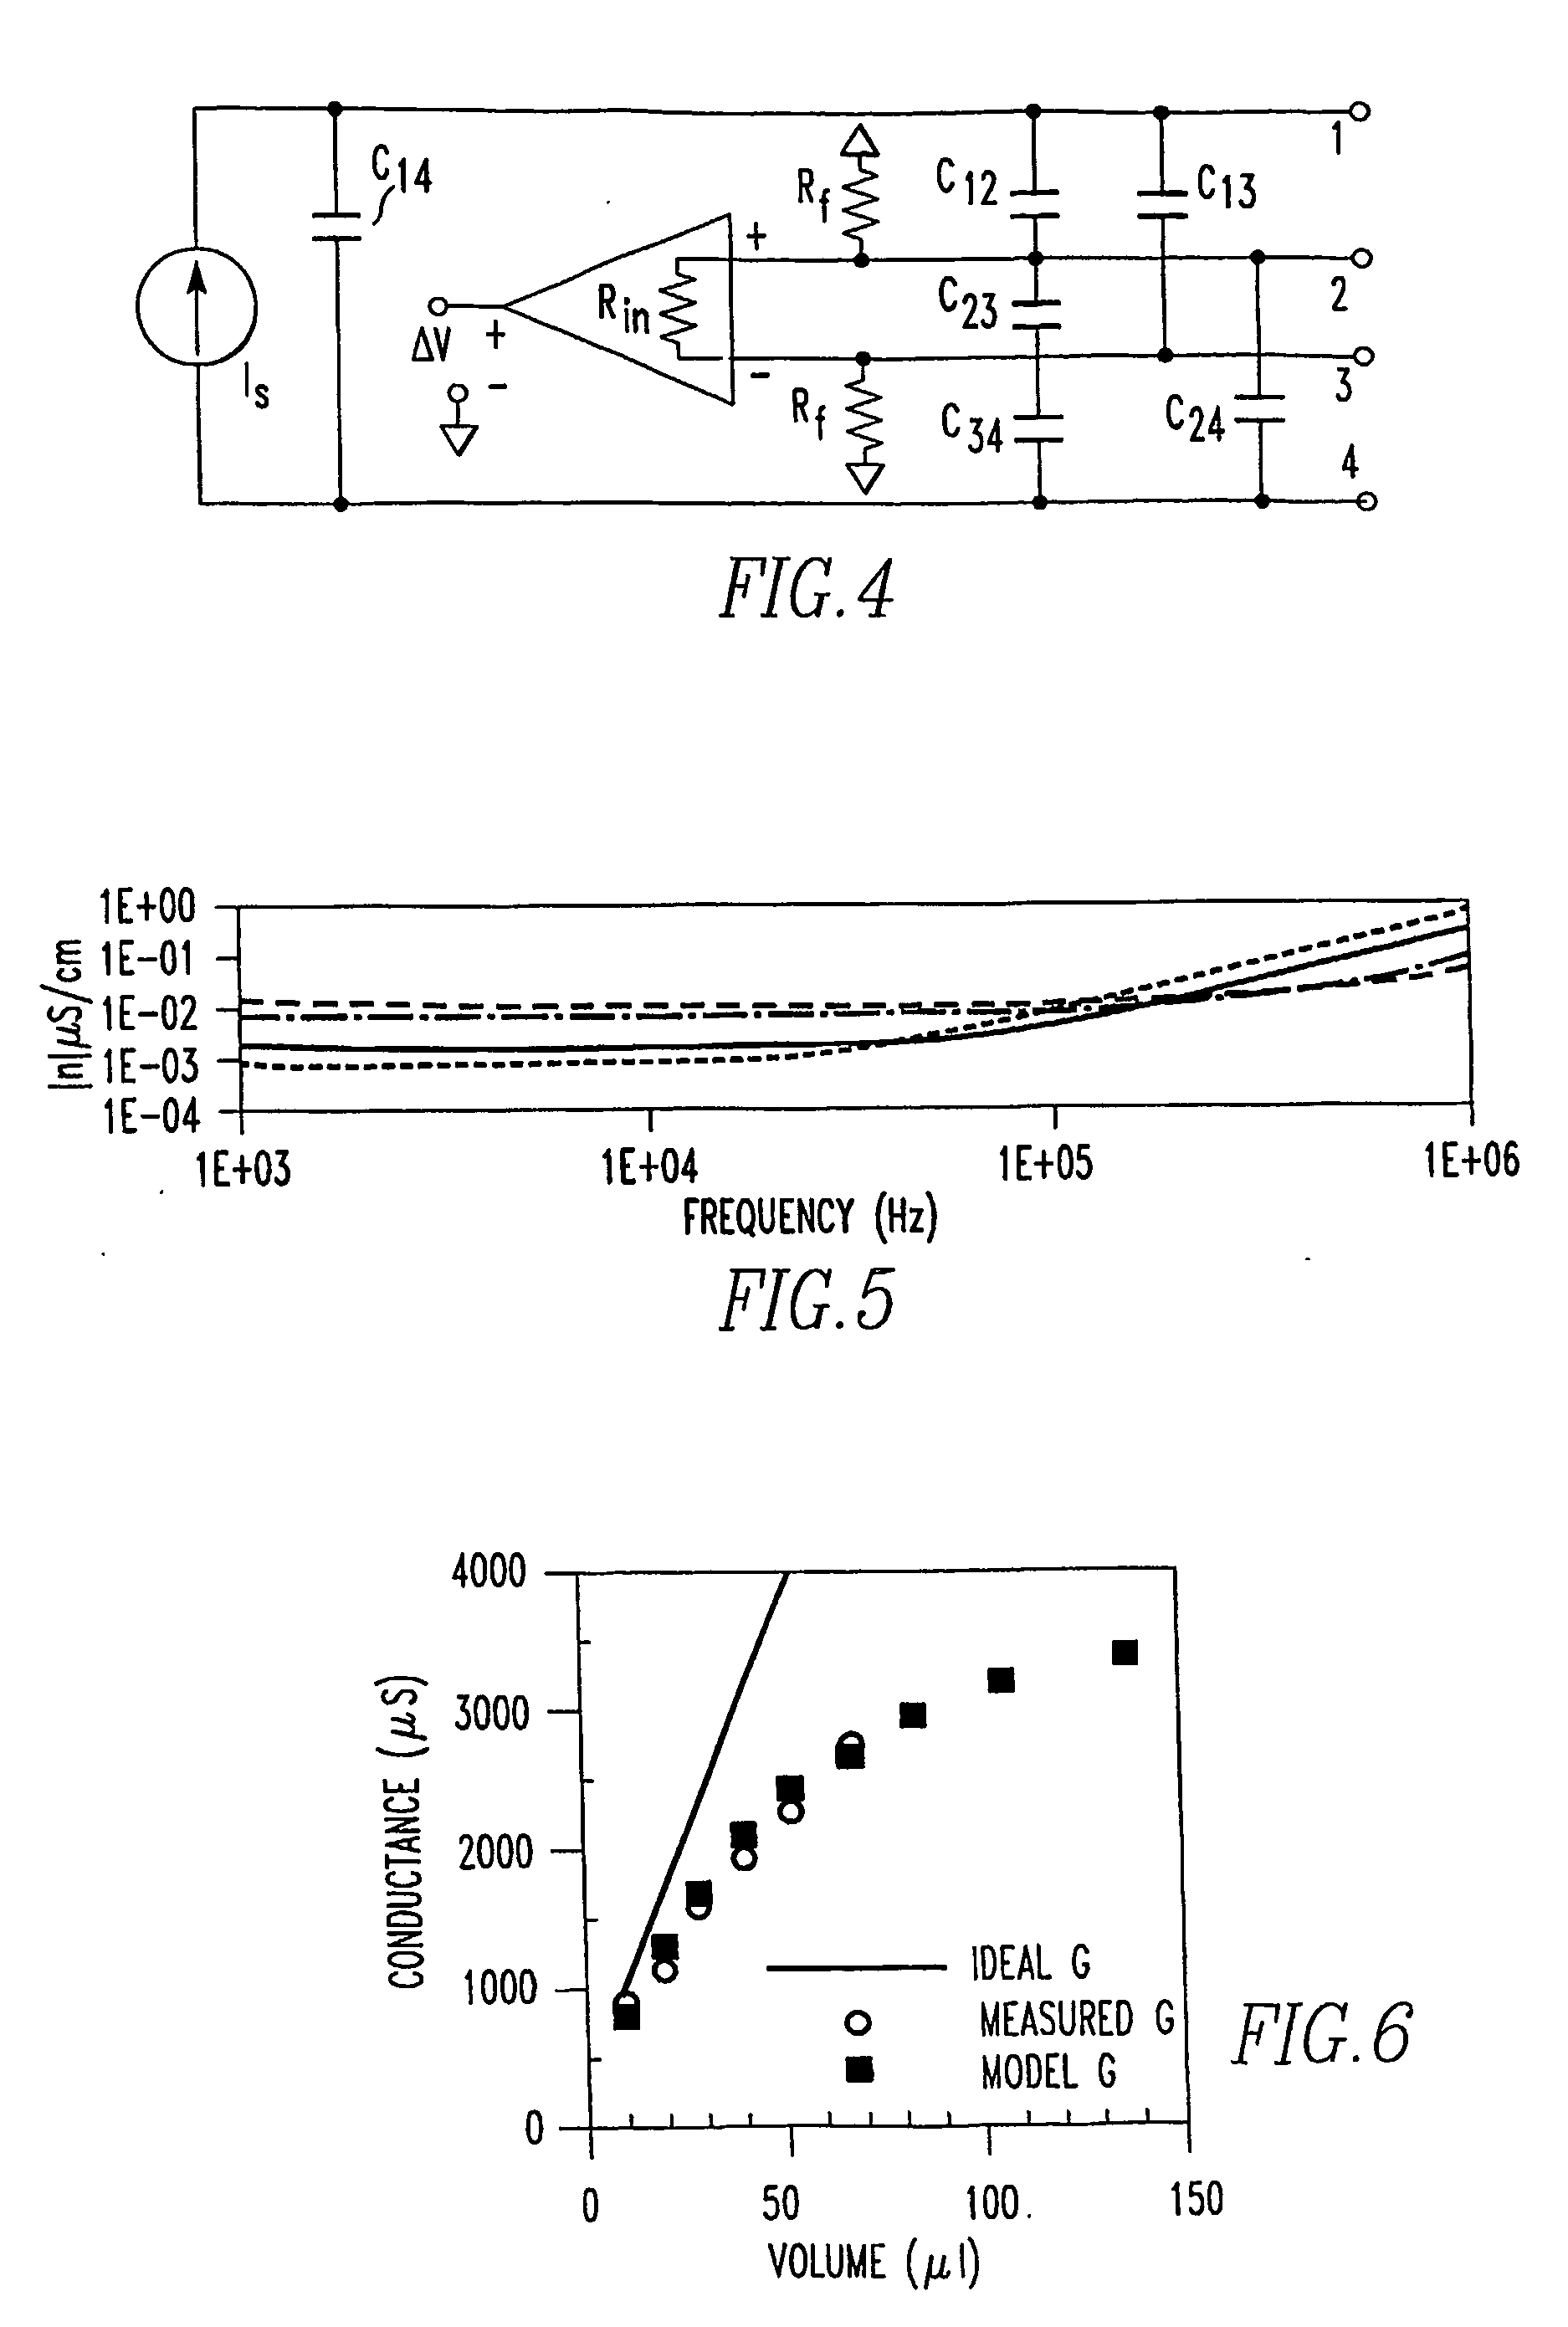 Method and Apparatus for Determining Cardiac Performance in a Patient with a Conductance Catheter